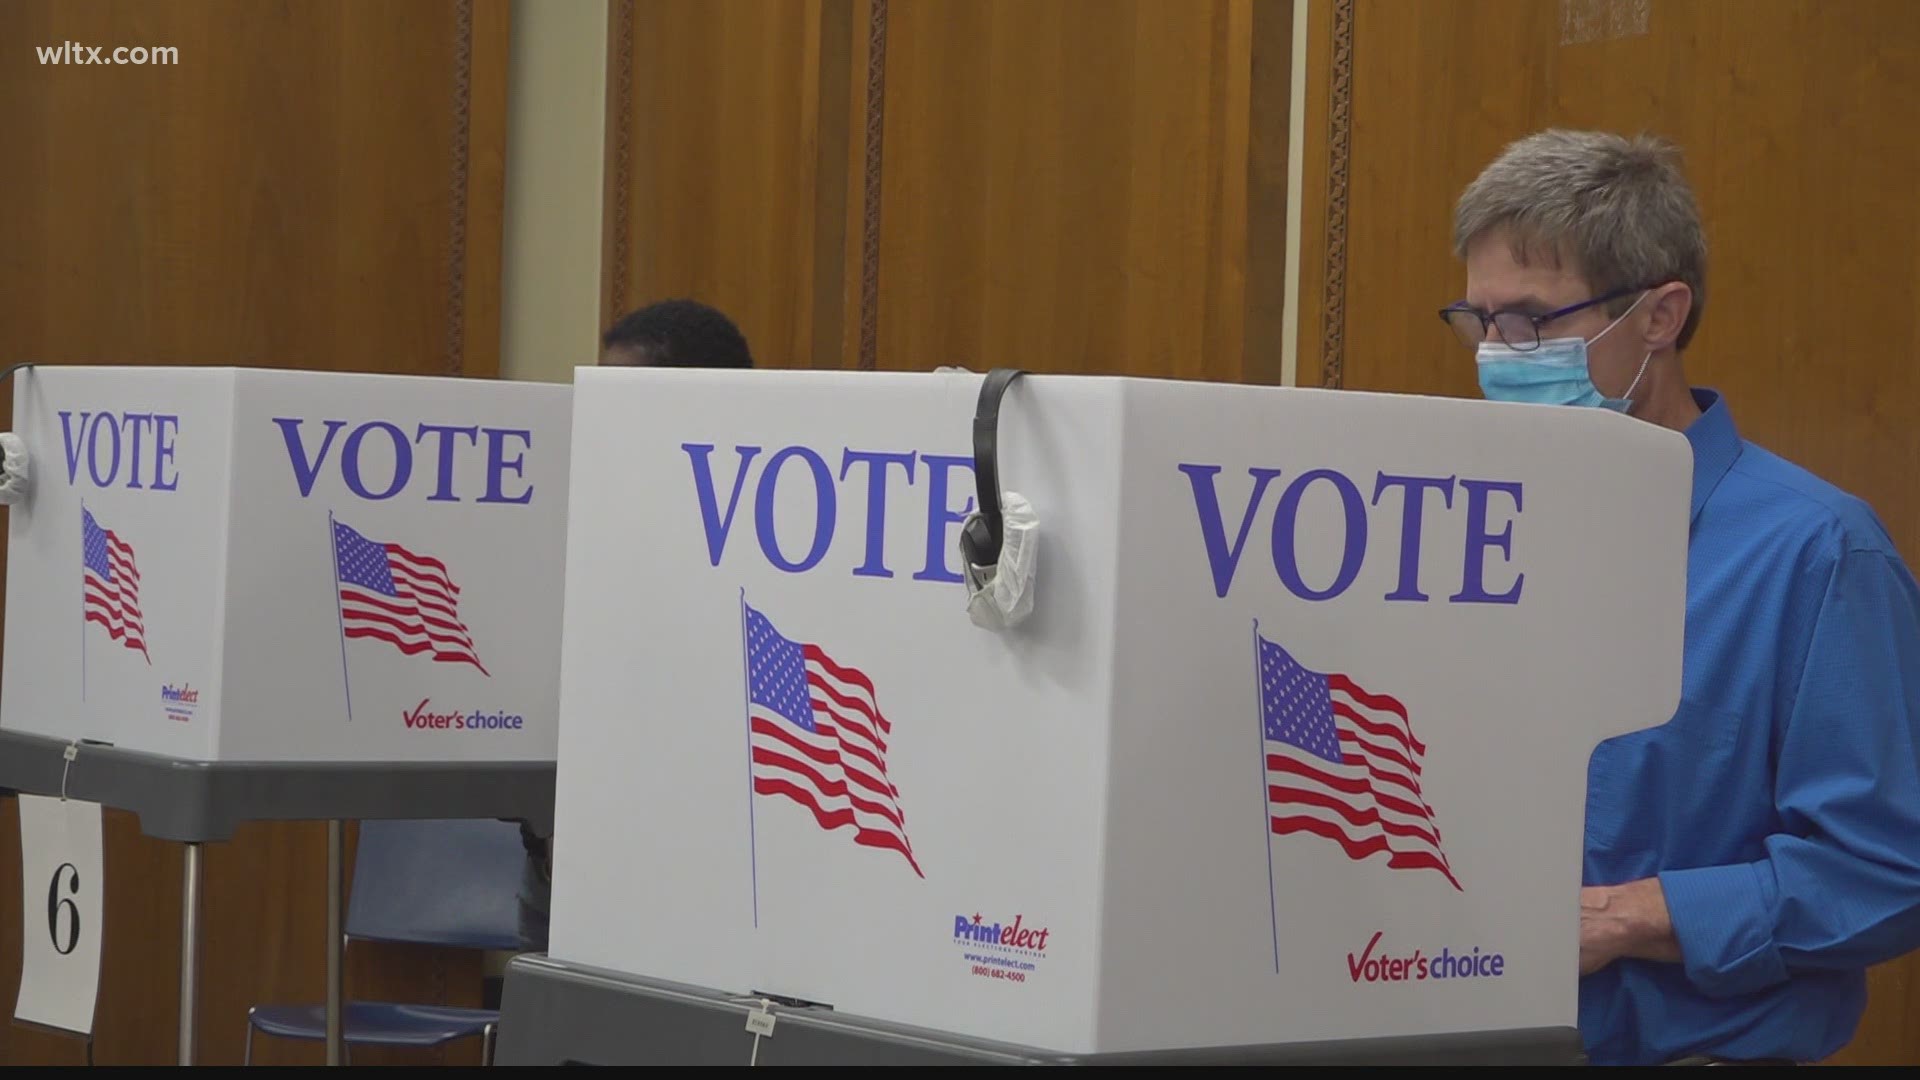 Sumter clerk said that more than 2,000 people had come to cast their ballots so far.